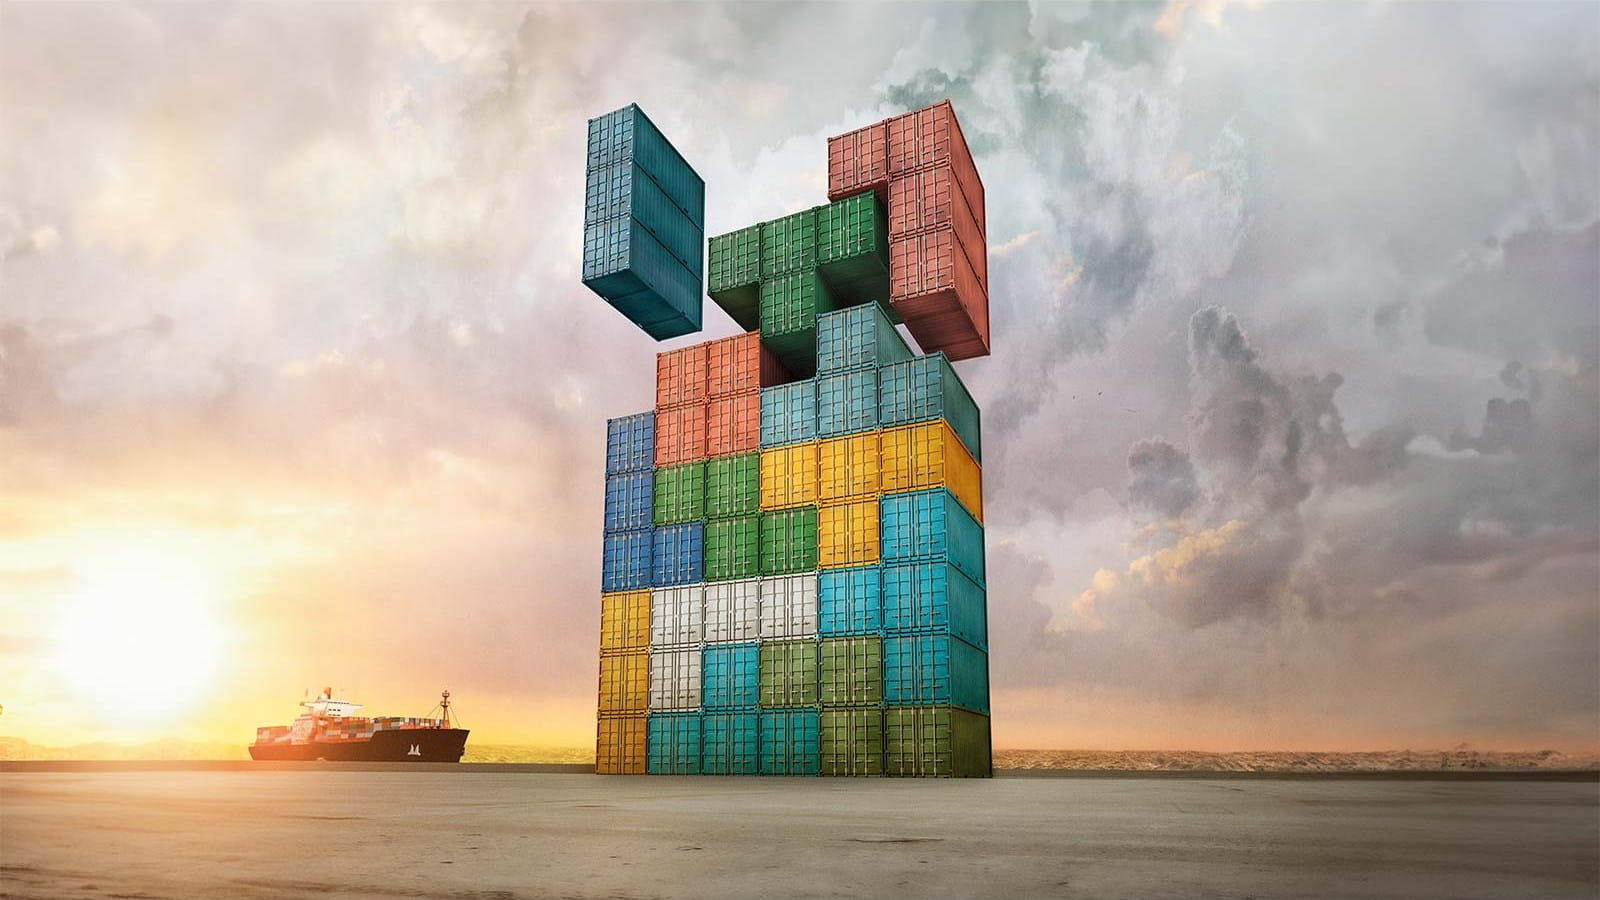 shipping containers stack tower multi colours like Tetris slotting together dock sunset ship clouds